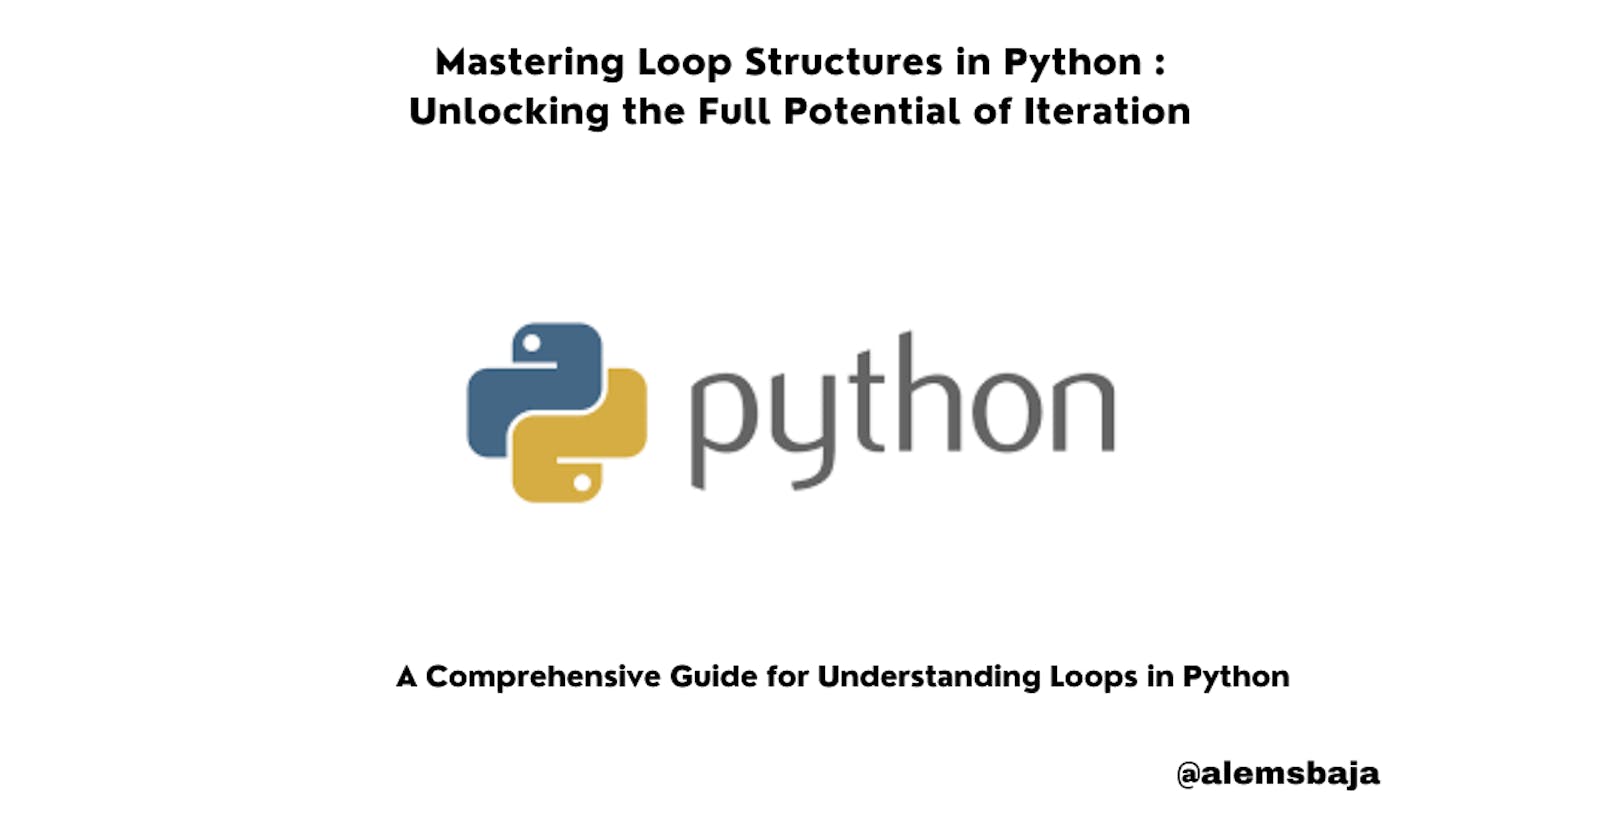 Mastering Loop Structures in Python : Unlocking the Full Potential of Iteration